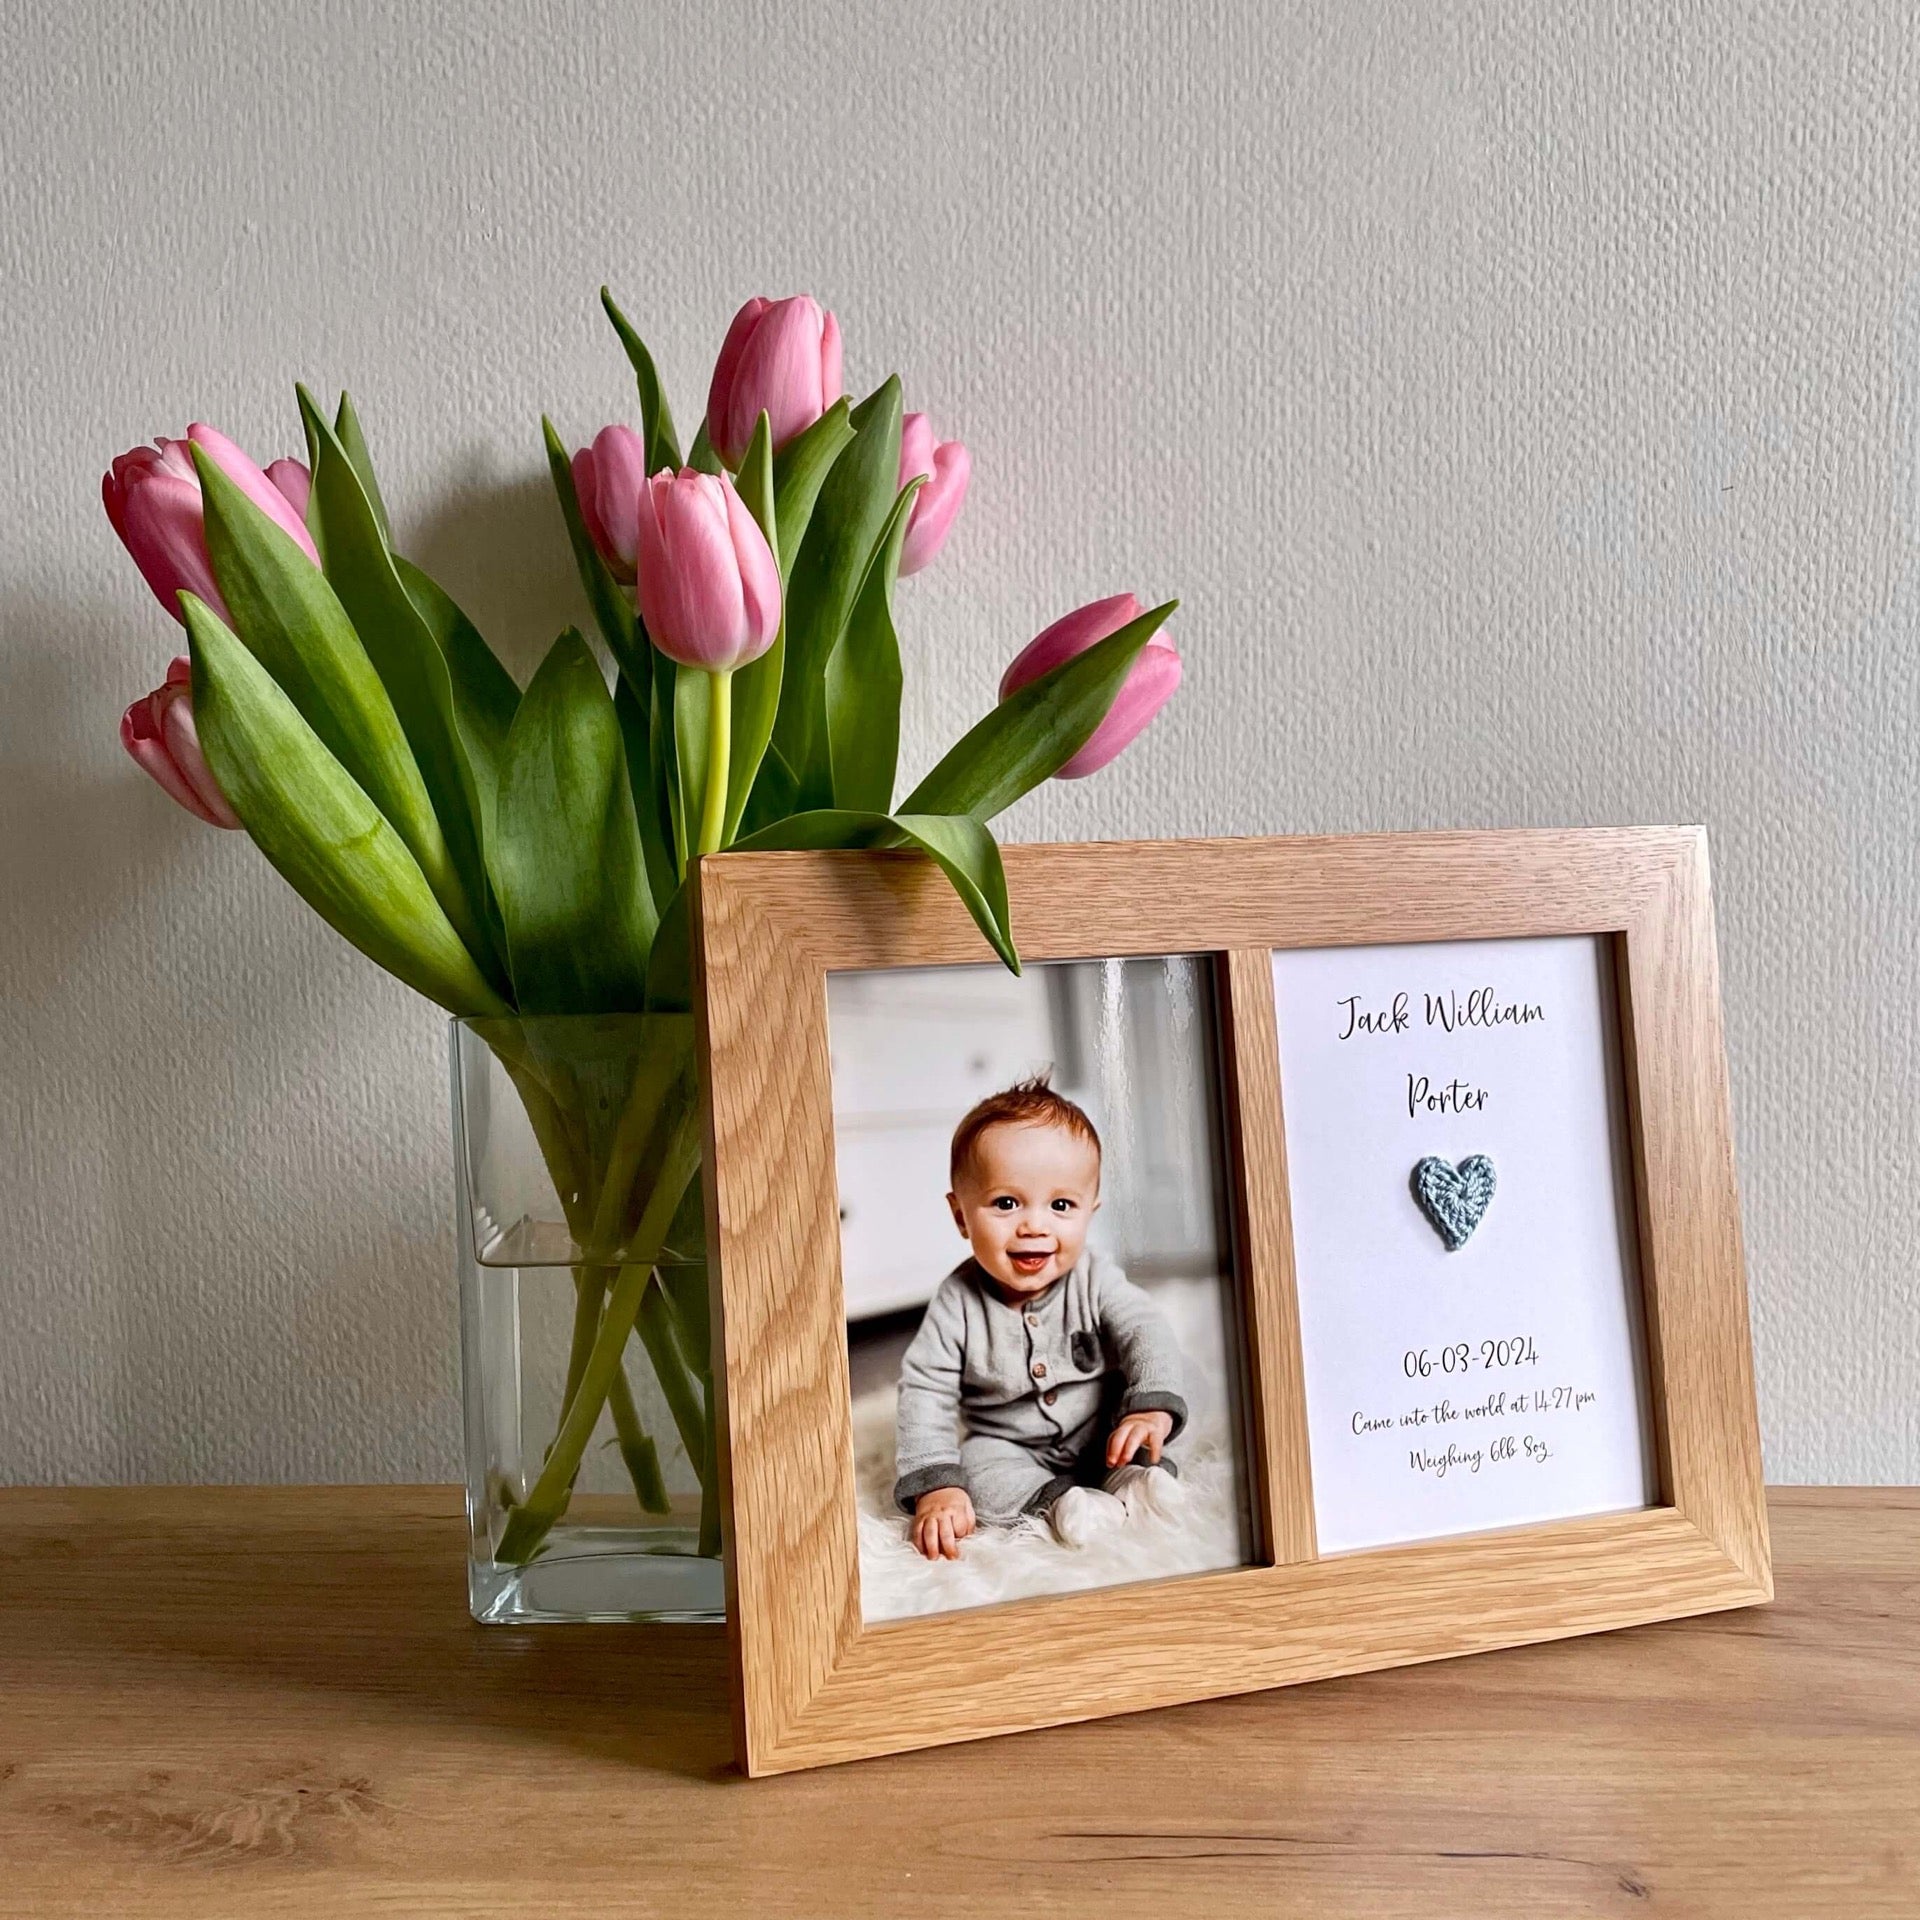 A personalised new baby boy card in an oak frame alongside a vase of pink tulips.